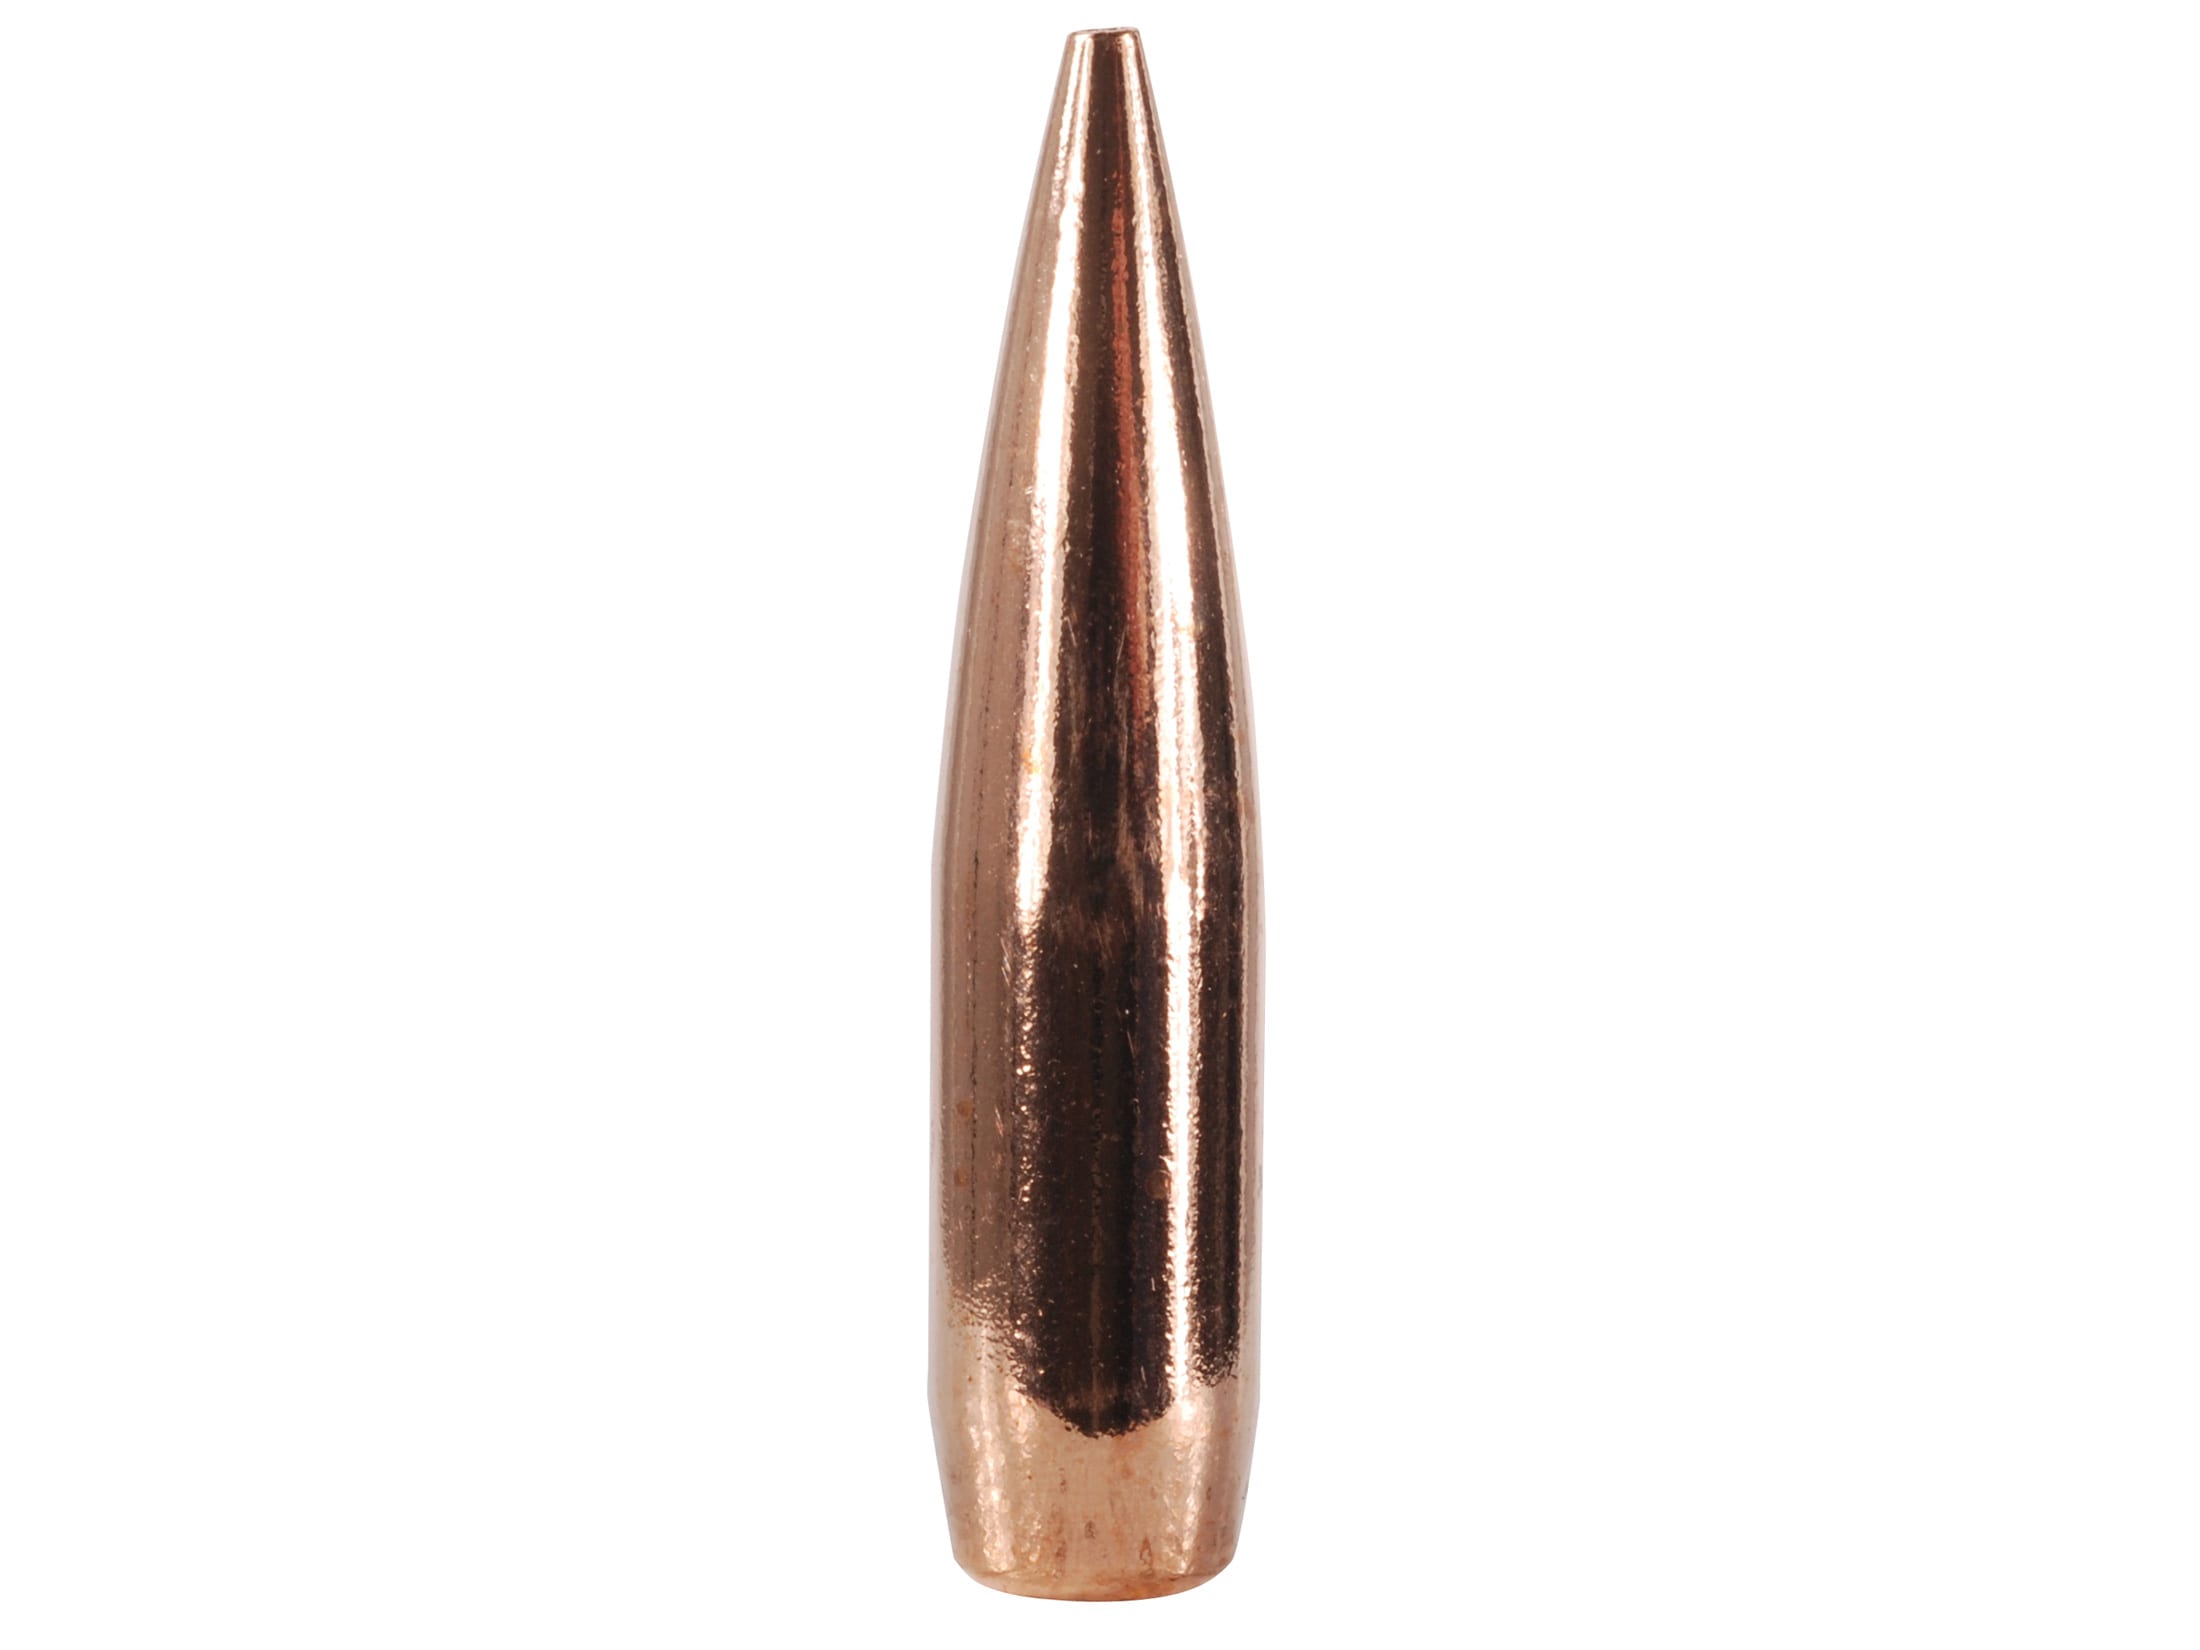 Berger Hunting Bullets 25 Caliber (257 Diameter) 115 Grain VLD Hollow Point Boat Tail